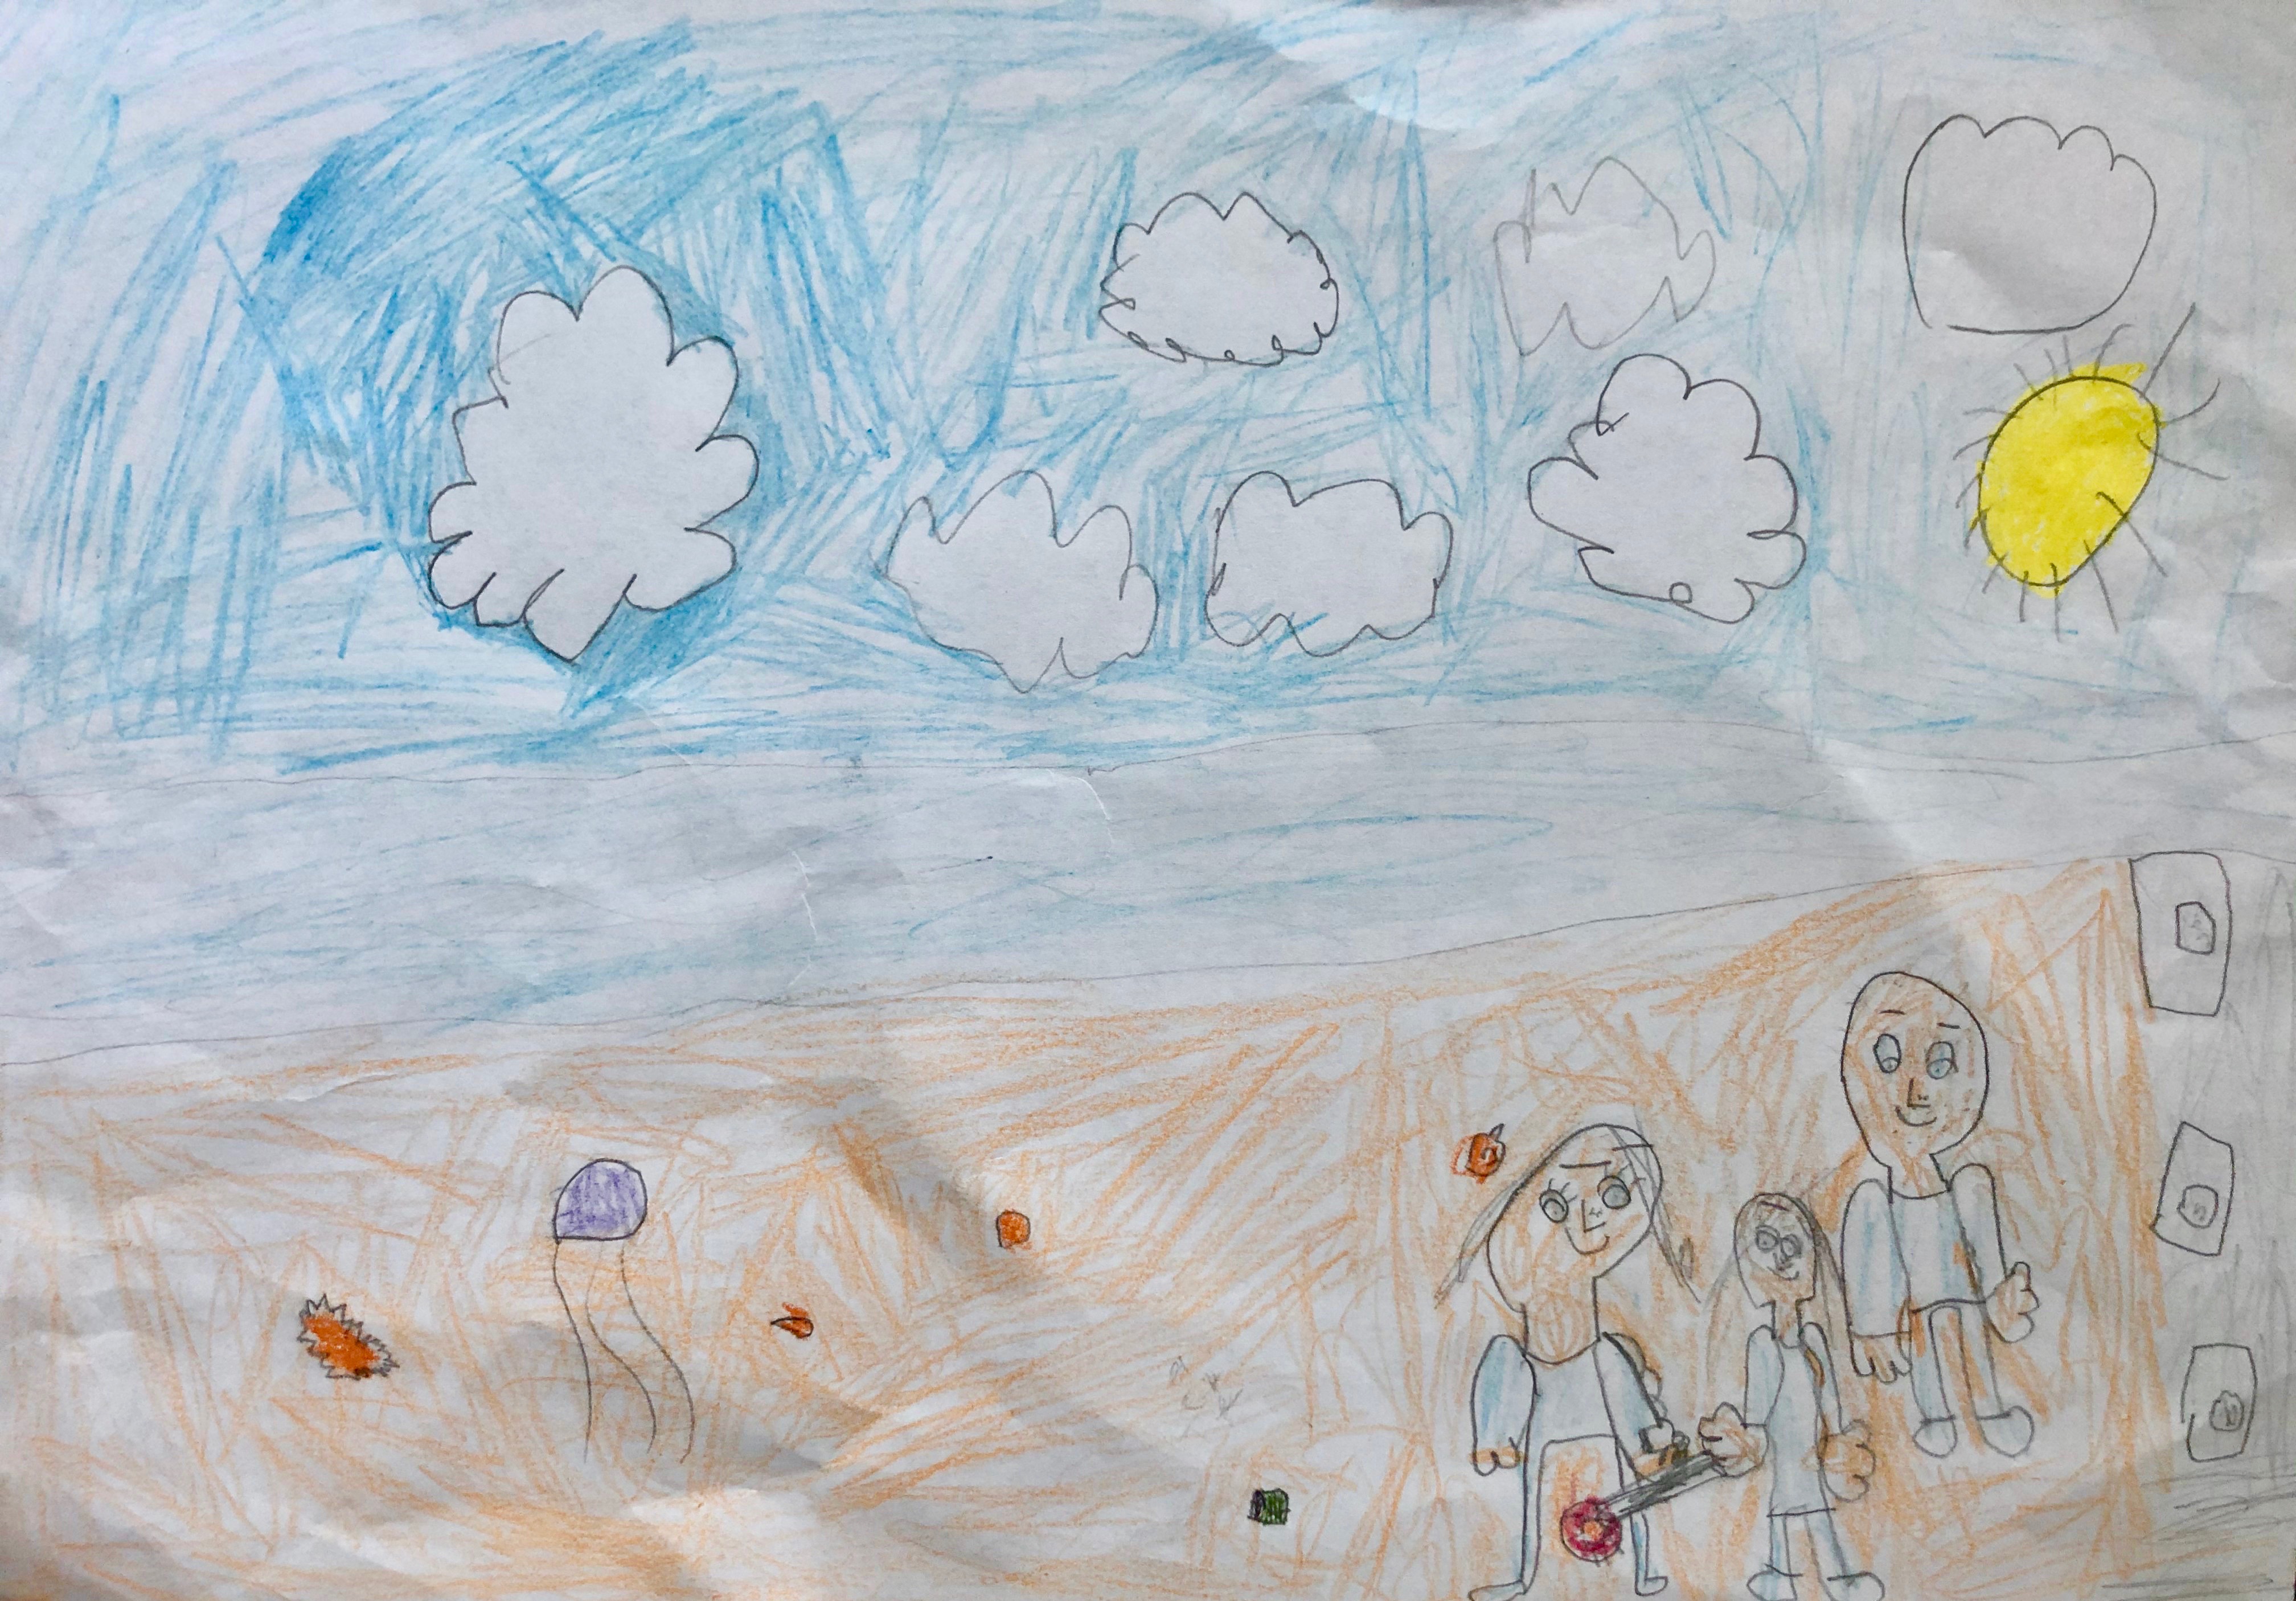 'Looking for treasure on the beach' by Ruby (6) from Meath